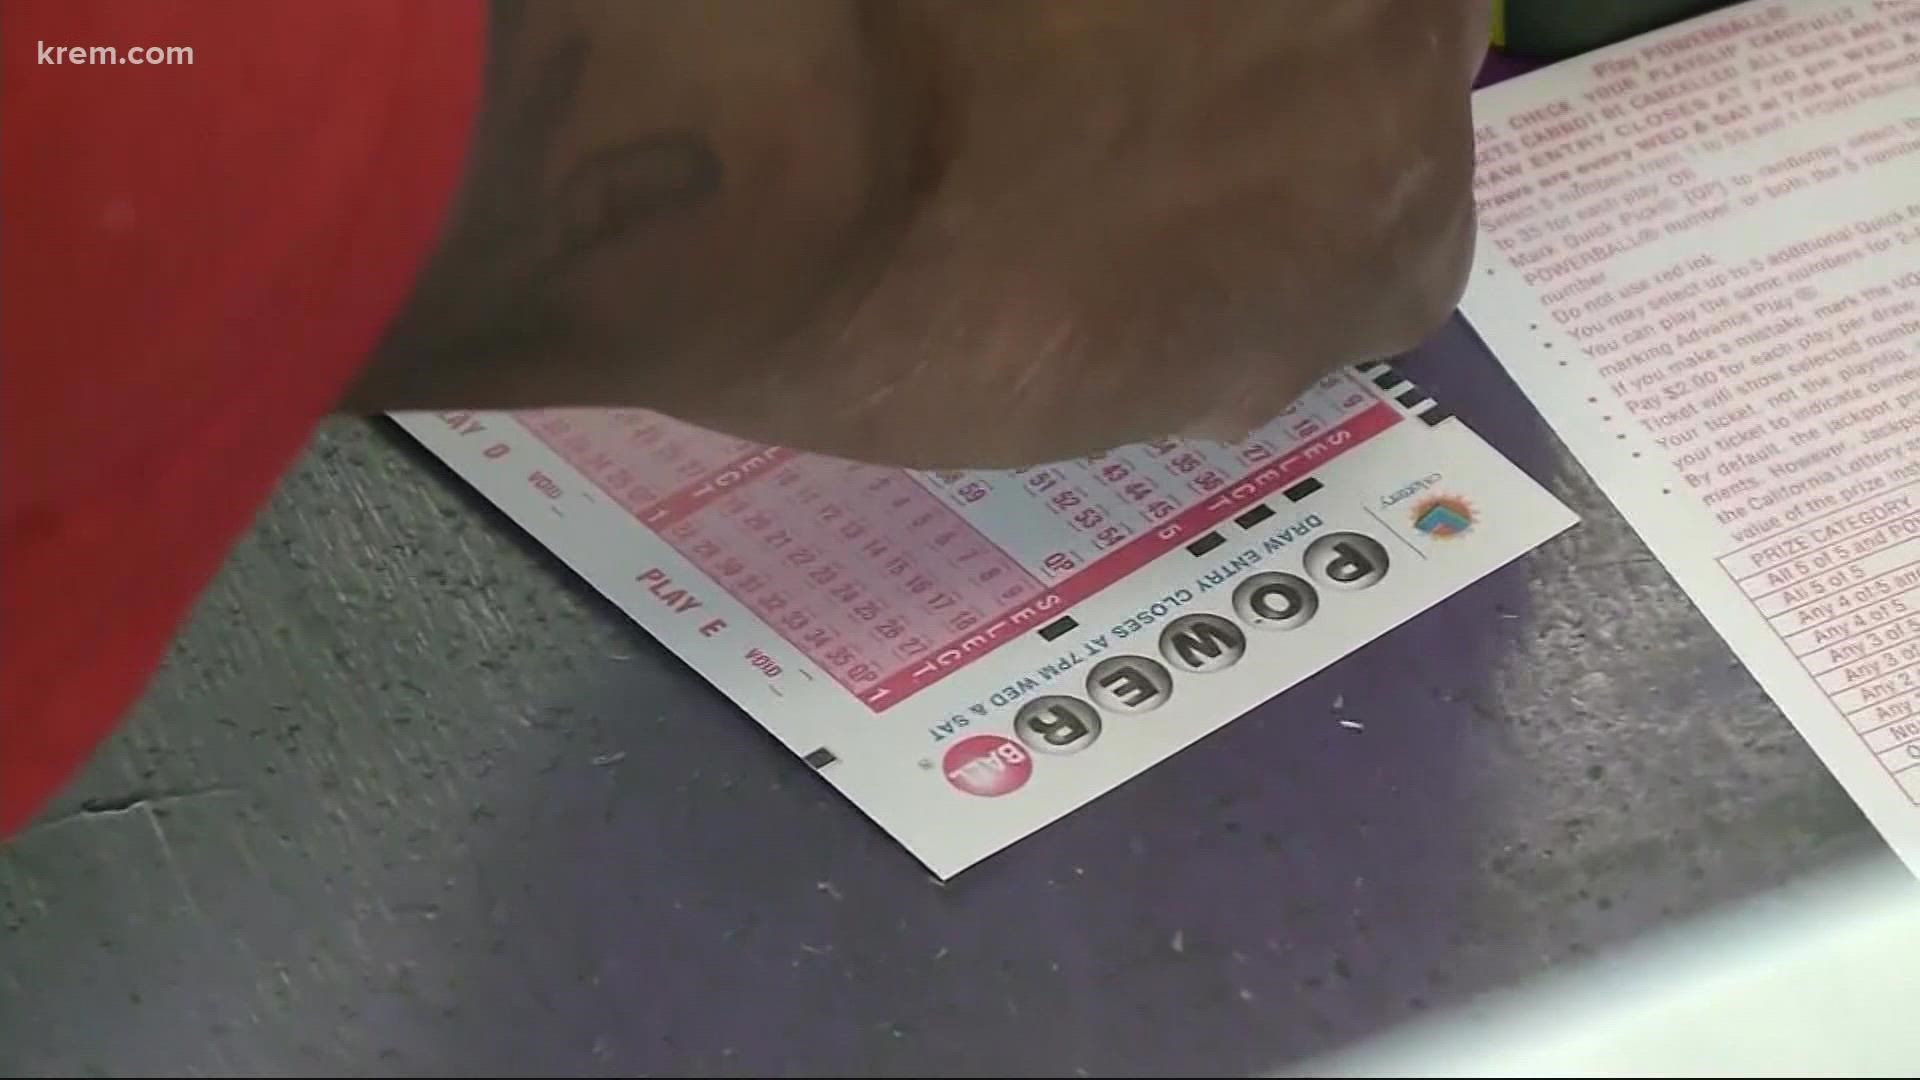 After 40 drawings without a big Powerball winner, maybe Monday night's 41st attempt will be different.